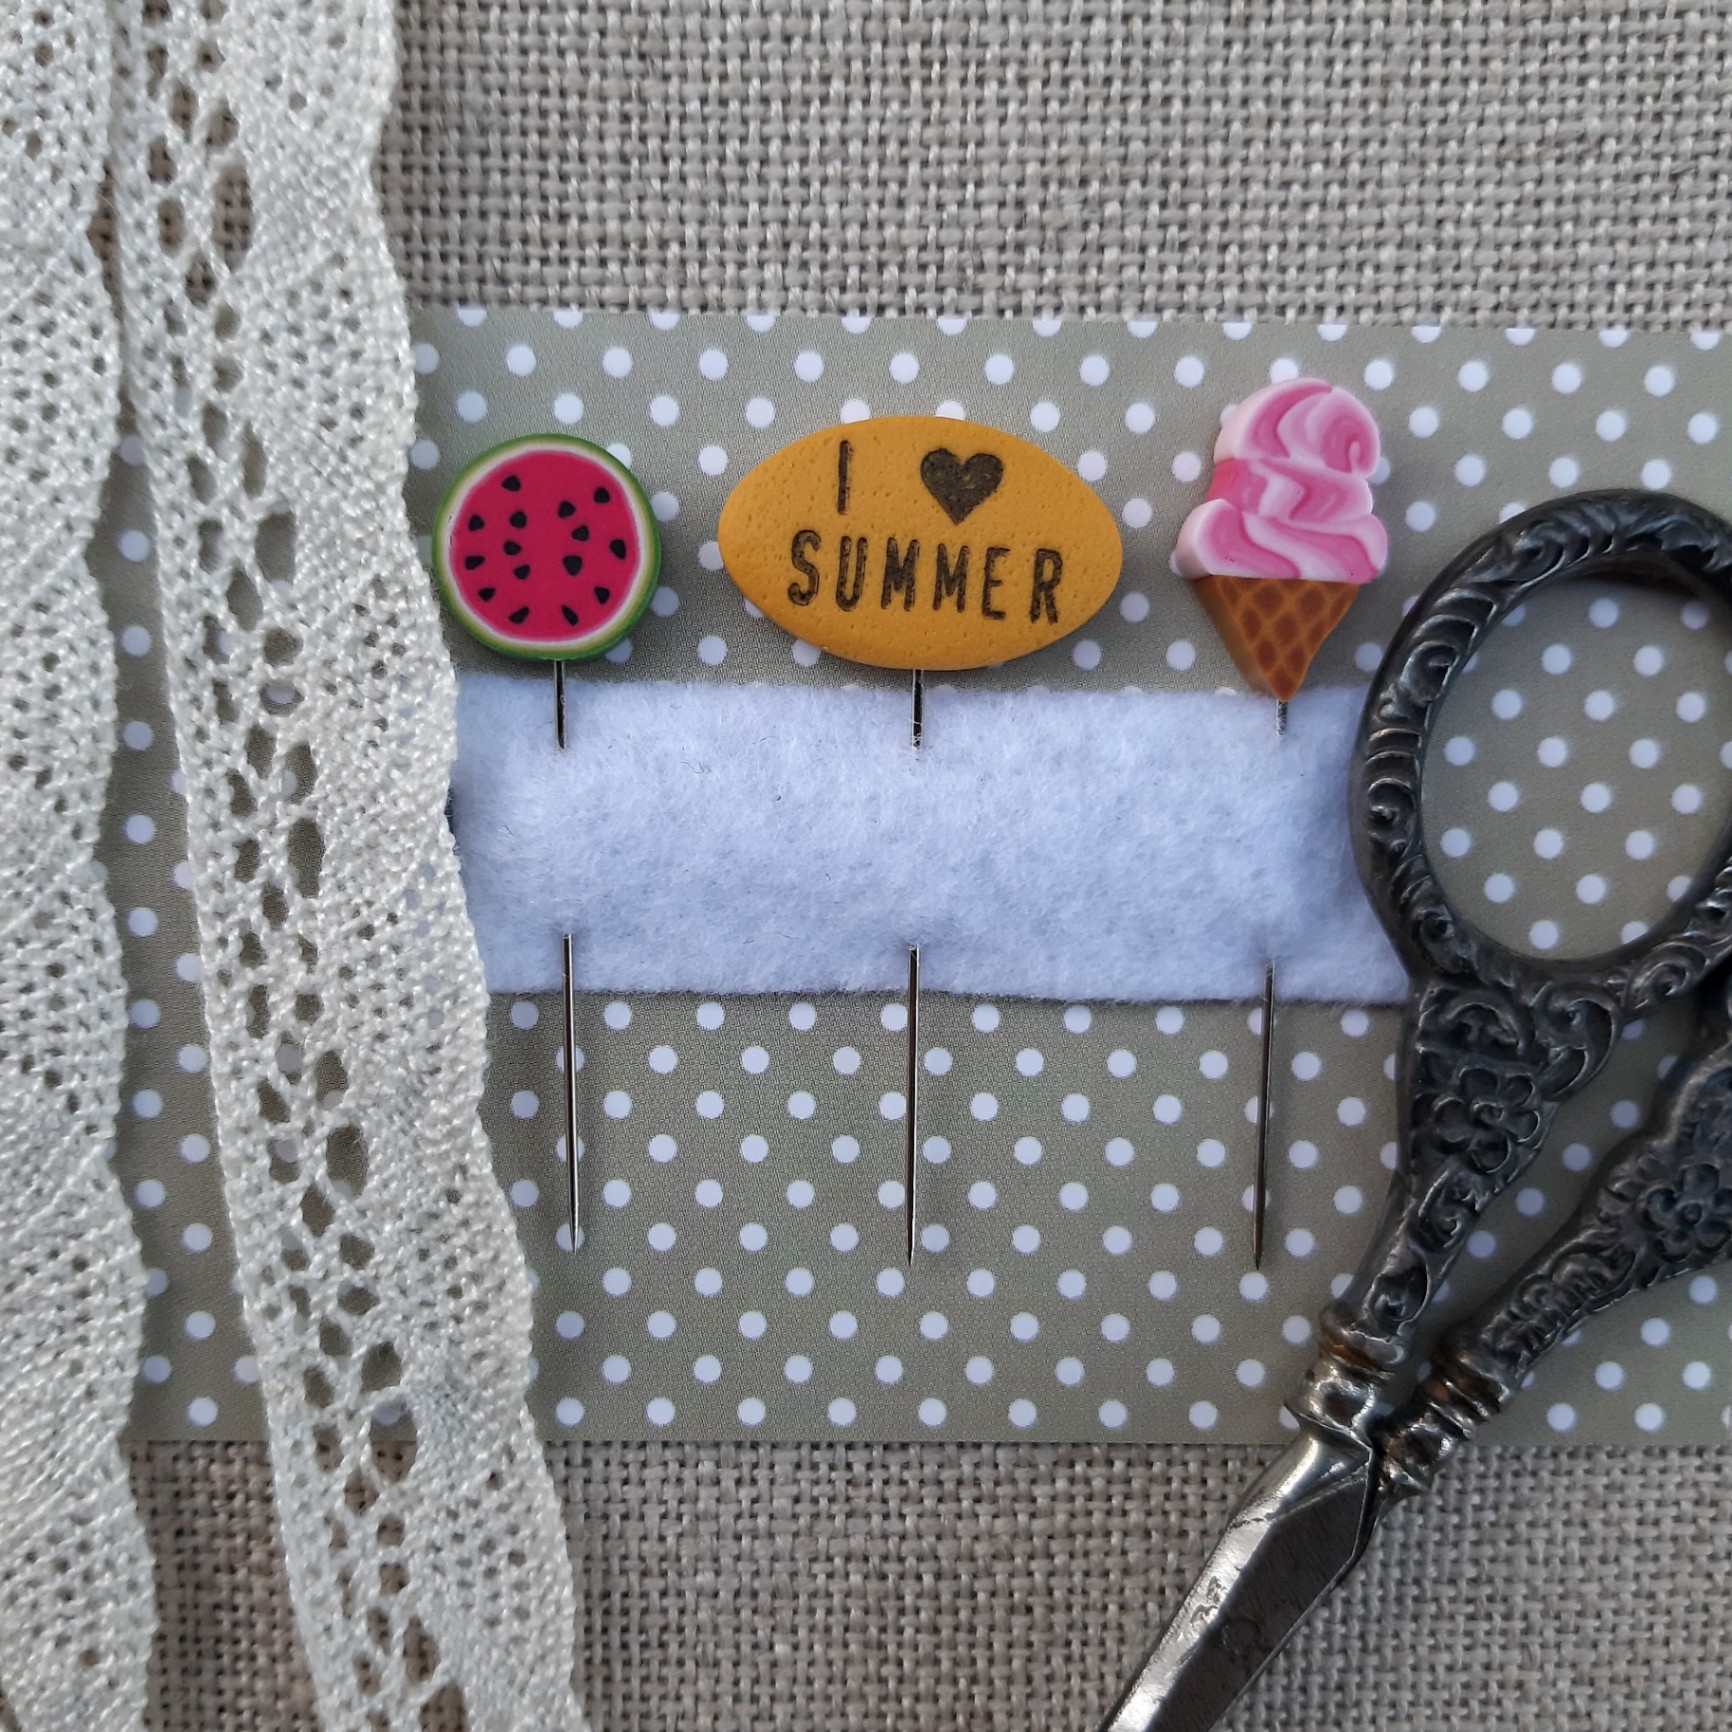 Pins :  I love Summer by Puntini Puntini  